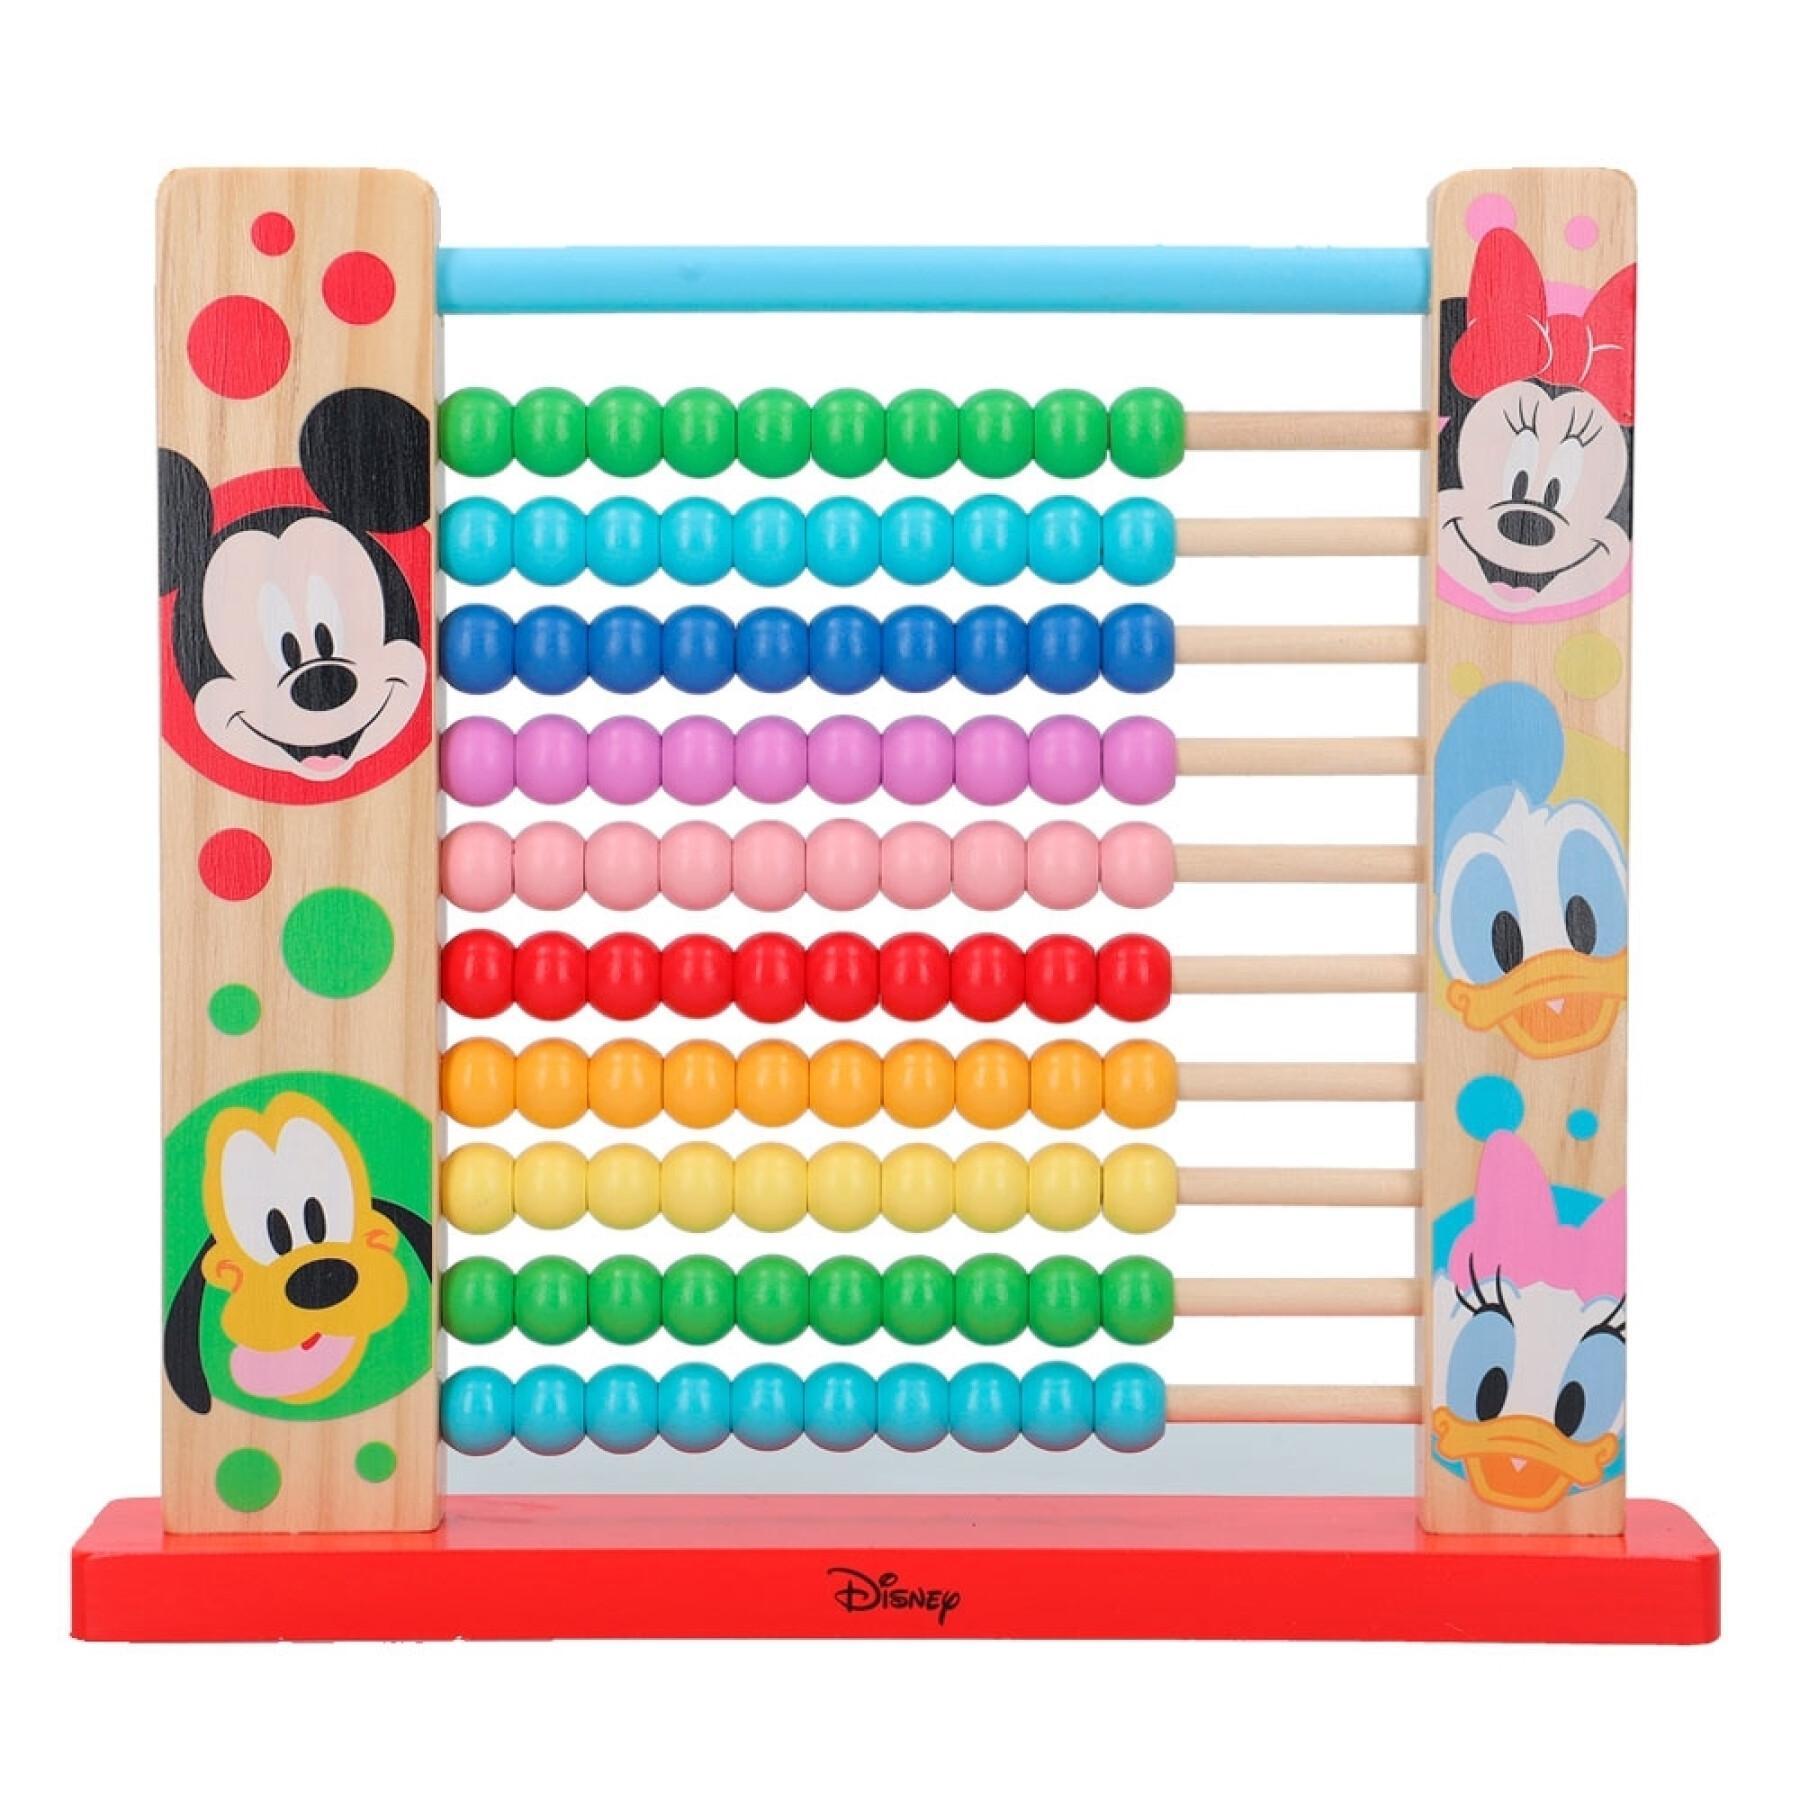 Educational wooden abacus games Woomax Mickey Mouse ECO